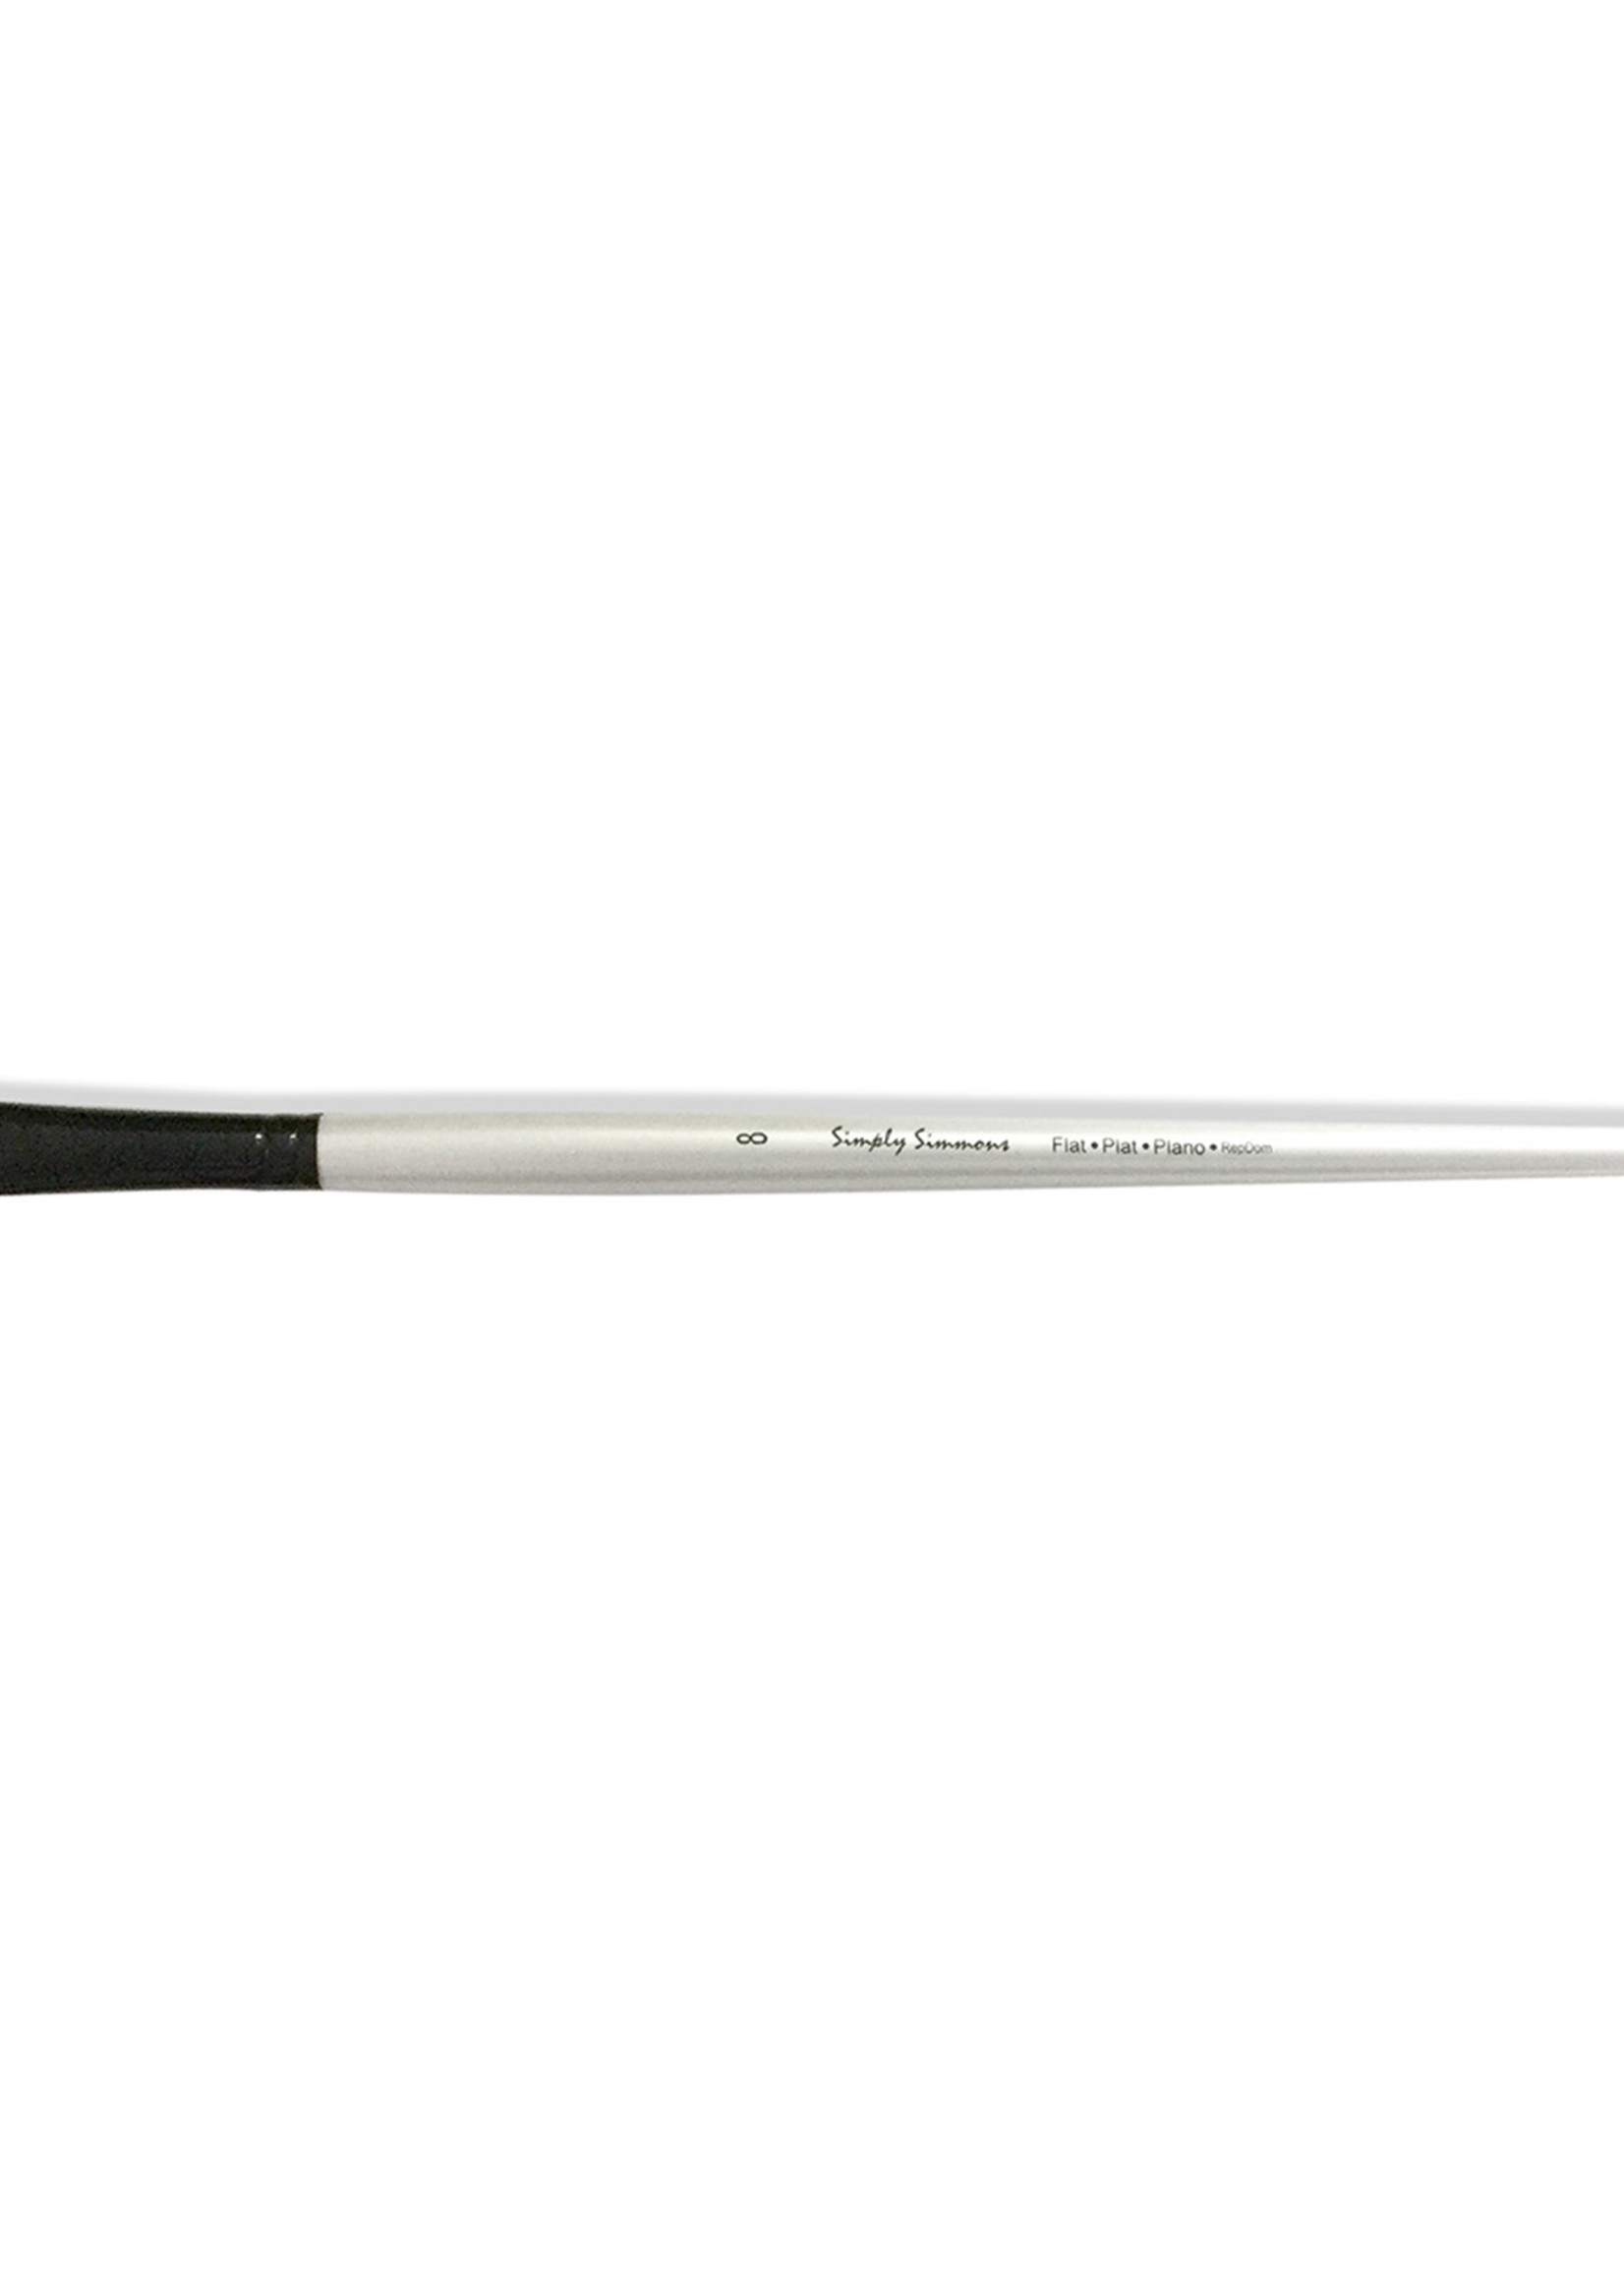 DALER-ROWNEY/FILA CO SIMPLY SIMMONS EXTRA FIRM SYNTHETIC LONG HANDLE FLAT 8